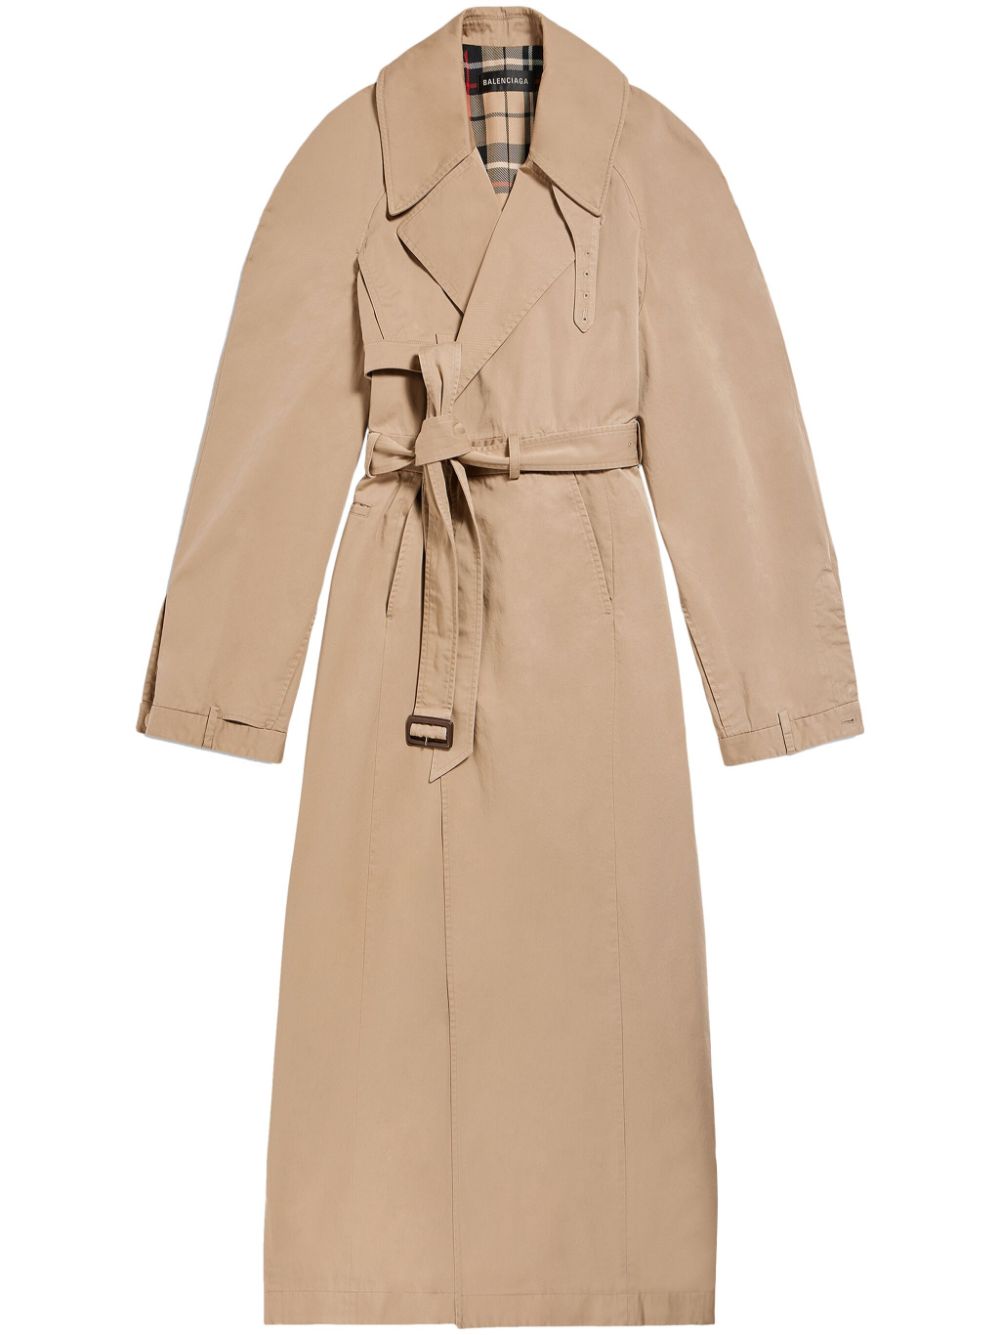 Balenciaga deconstructed cotton trench coat - Brown